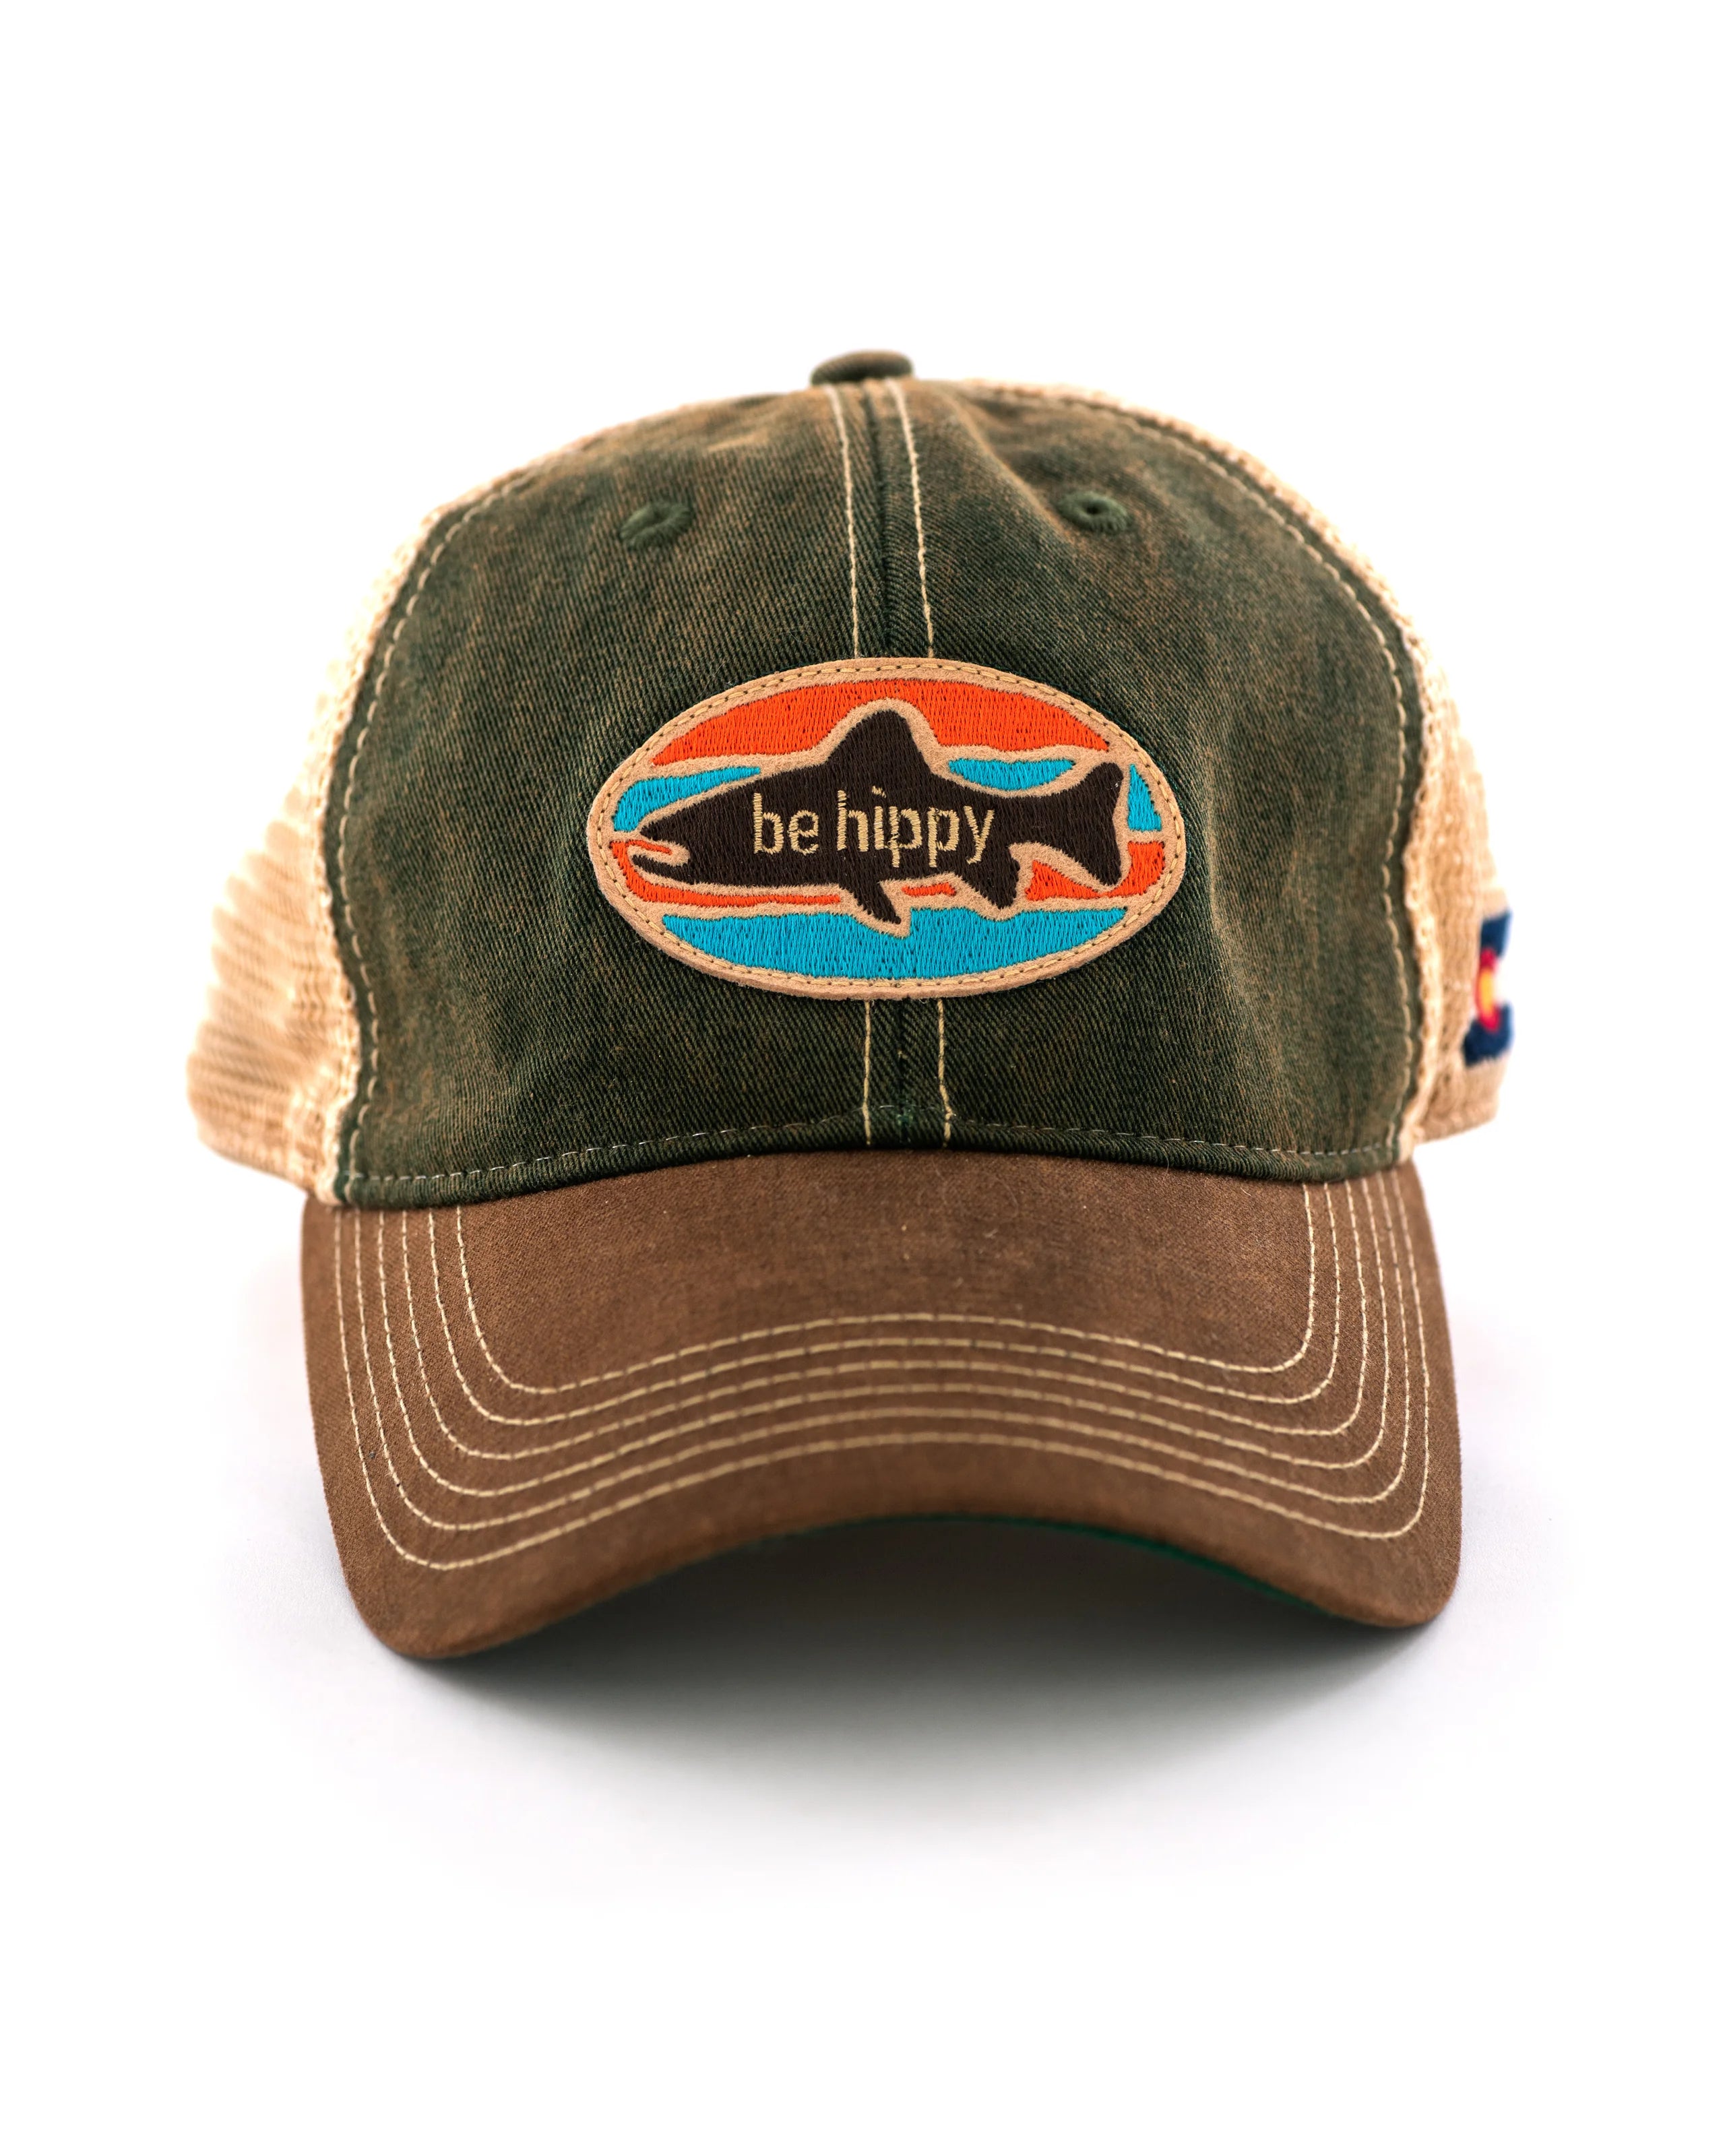 Be Hippy Vintage Fish Green/Brown Hat